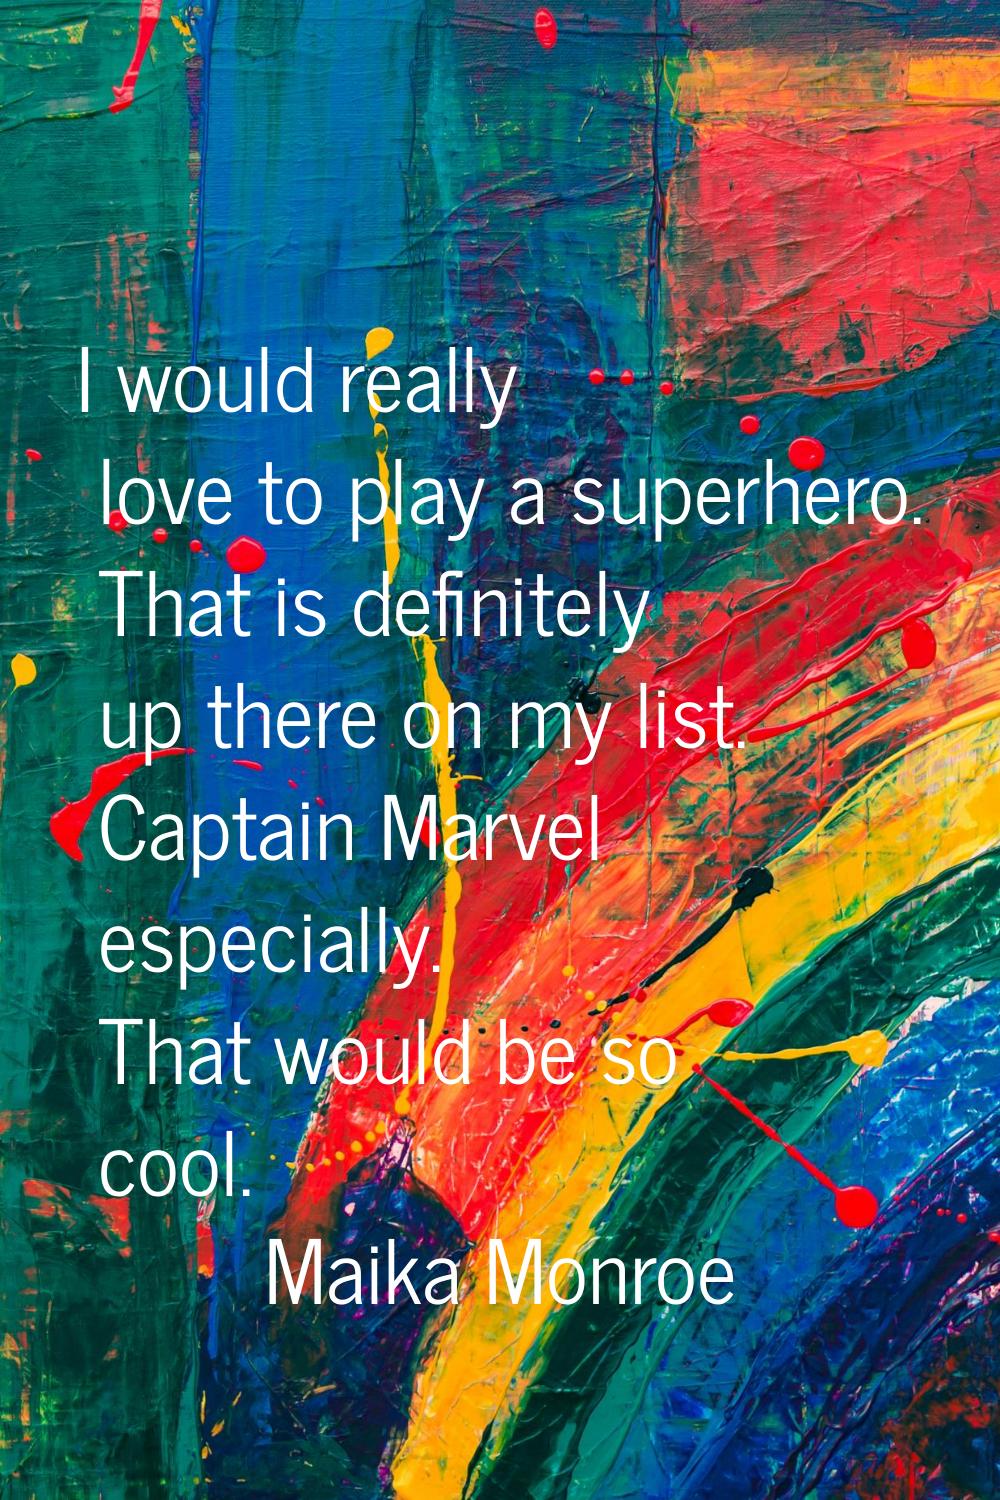 I would really love to play a superhero. That is definitely up there on my list. Captain Marvel esp